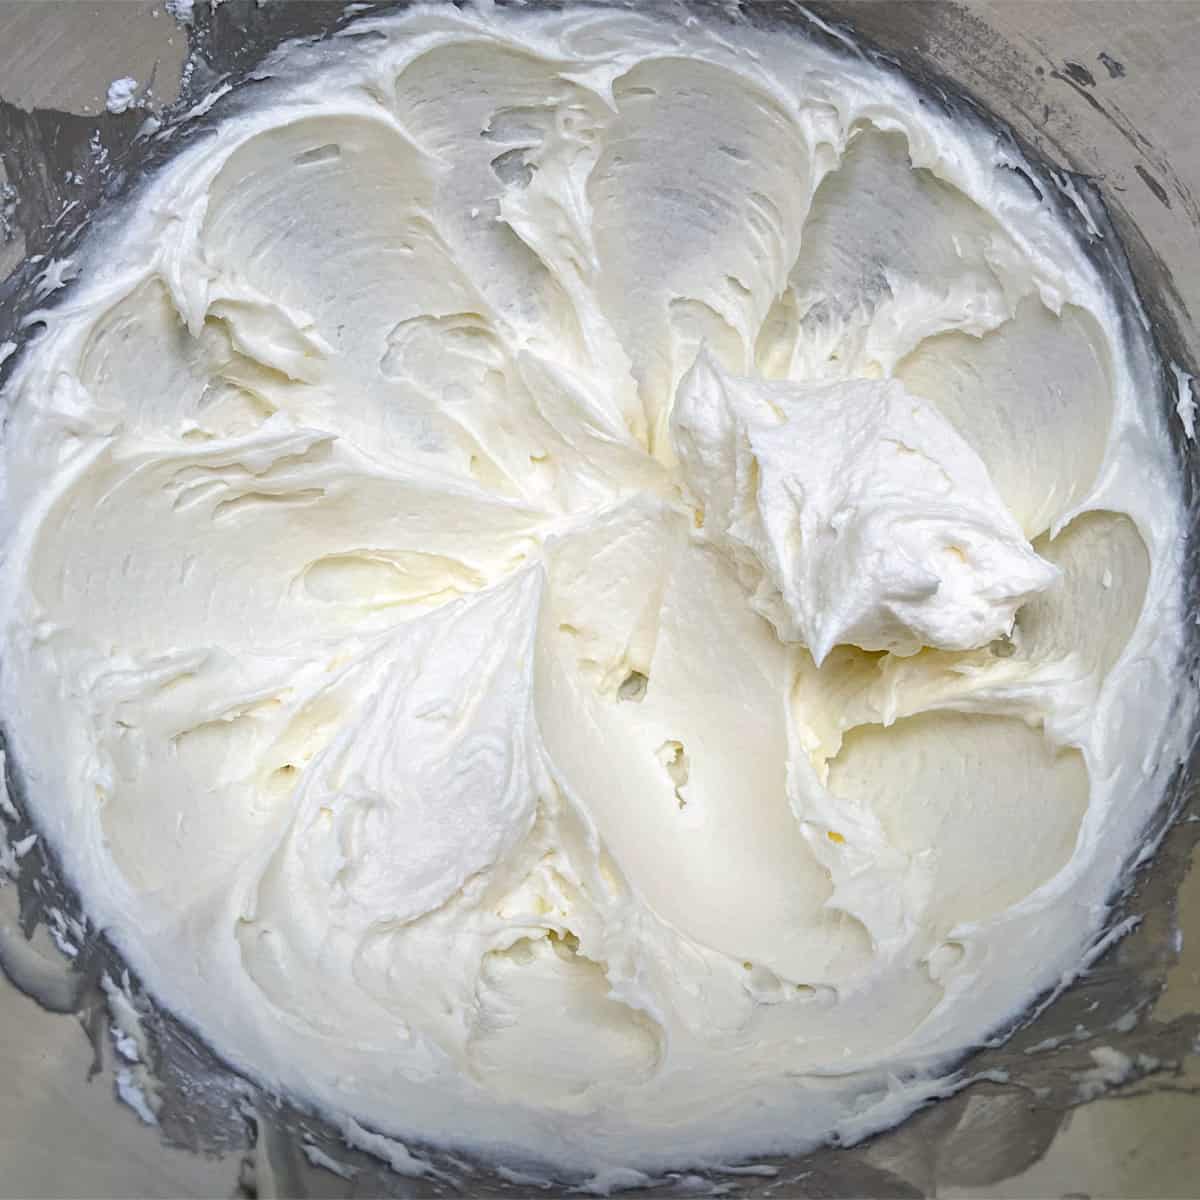 How creamy the butter, cream cheese and powdered sugar looks after mixing for a couple of minutes.